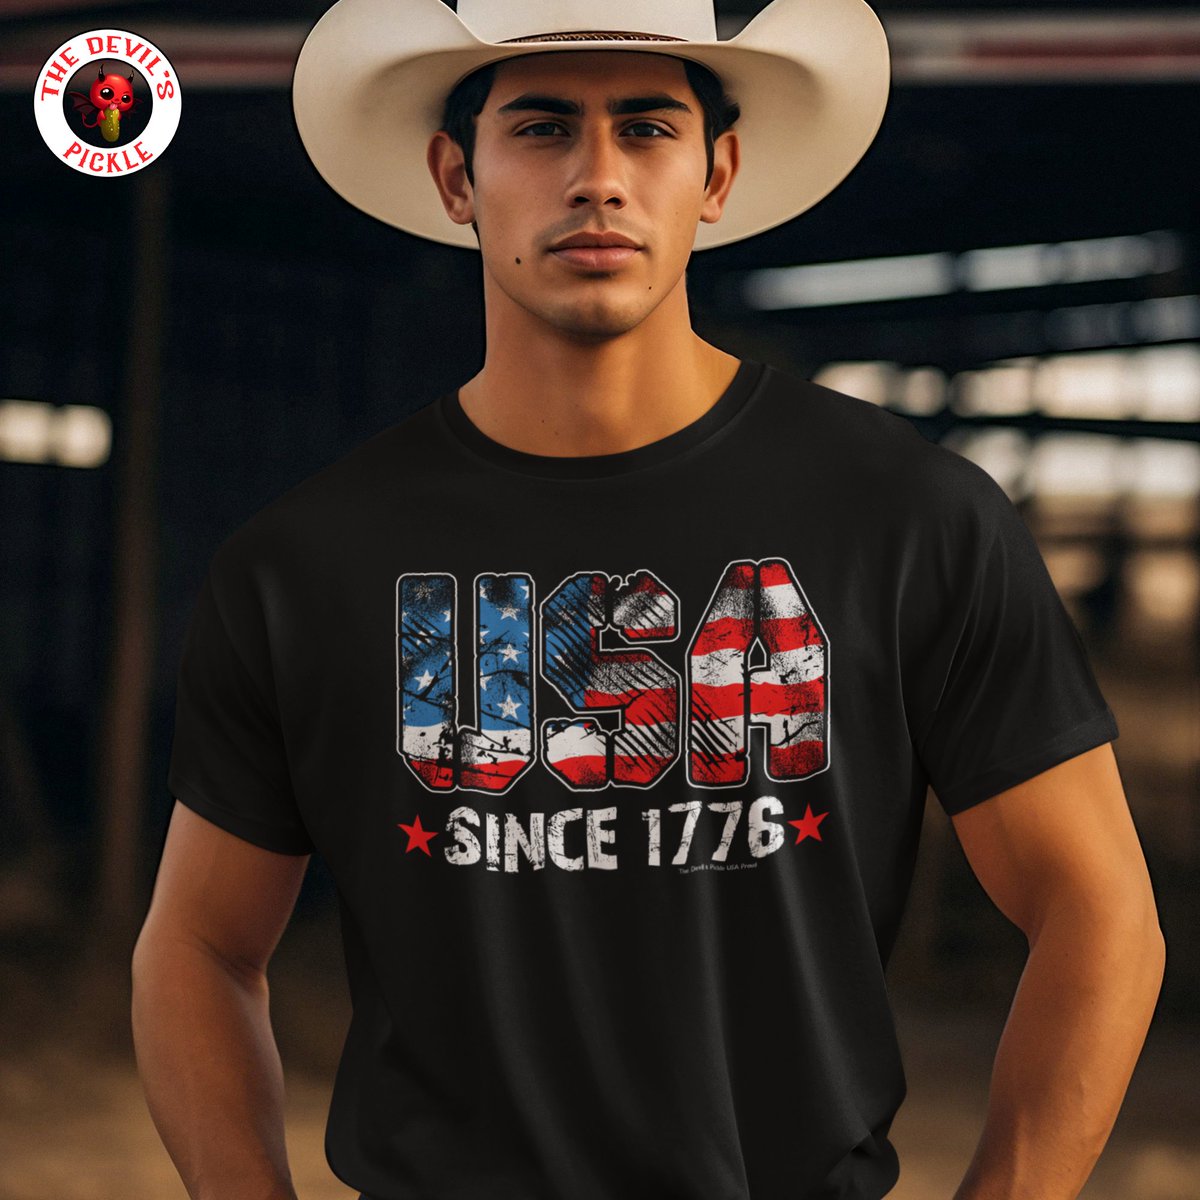 If loving America is wrong, I don't wanna be right! The Best Patriotic Tees, Hoodies and More at The Devil's Pickle. ❤️

#2ndamendment #ProudAmerican #Freedom #americanpride #american #proudtobeanamerican #patriotichoodies #hellyeahamerica #WeStandForTheFlag #PatrioticAF